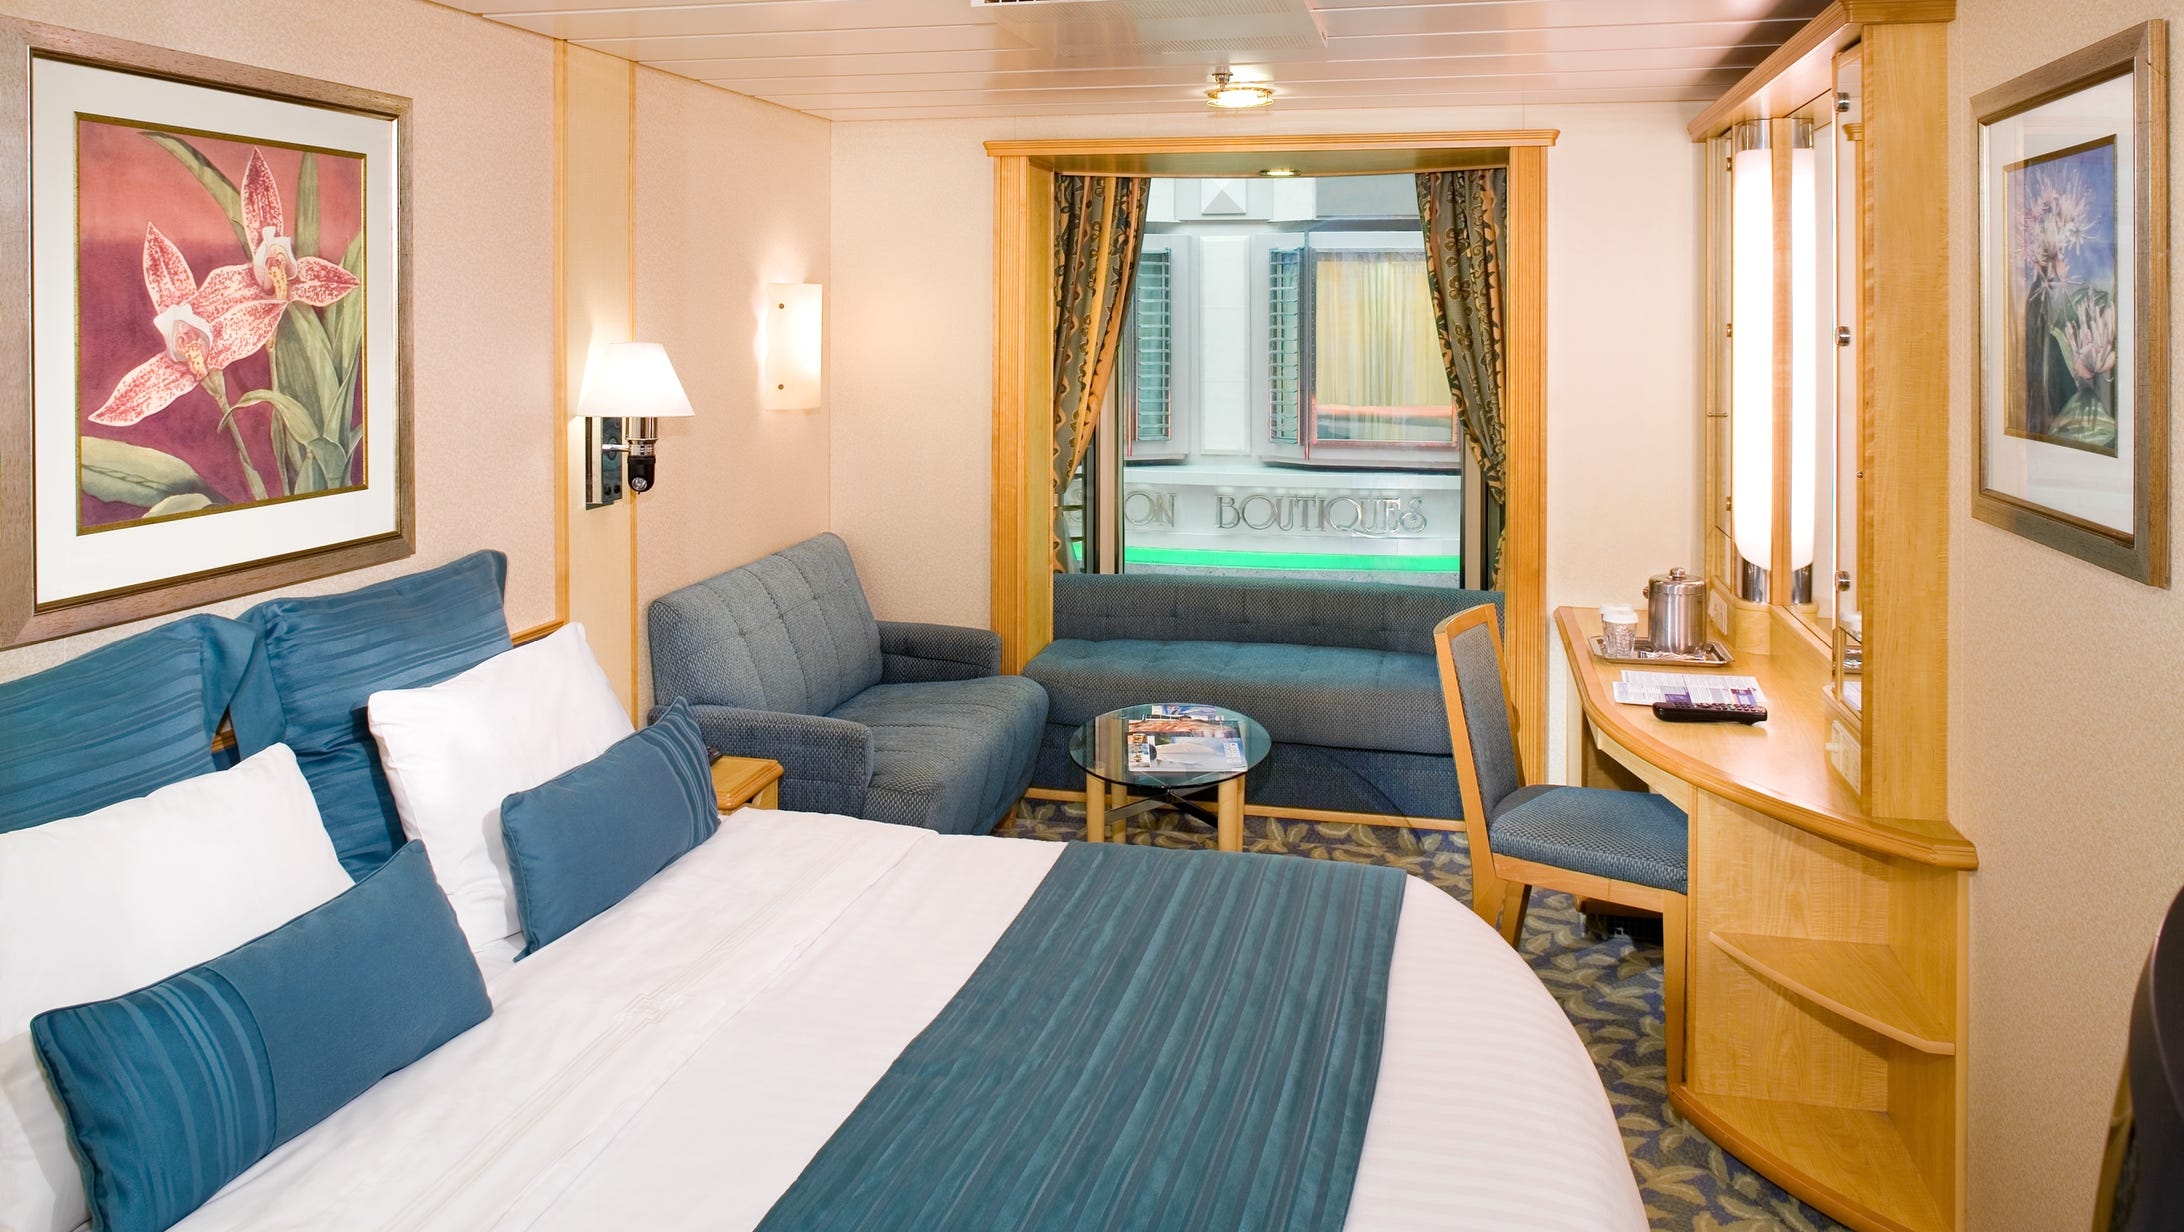 Video: Living large in a Royal Caribbean balcony cabin